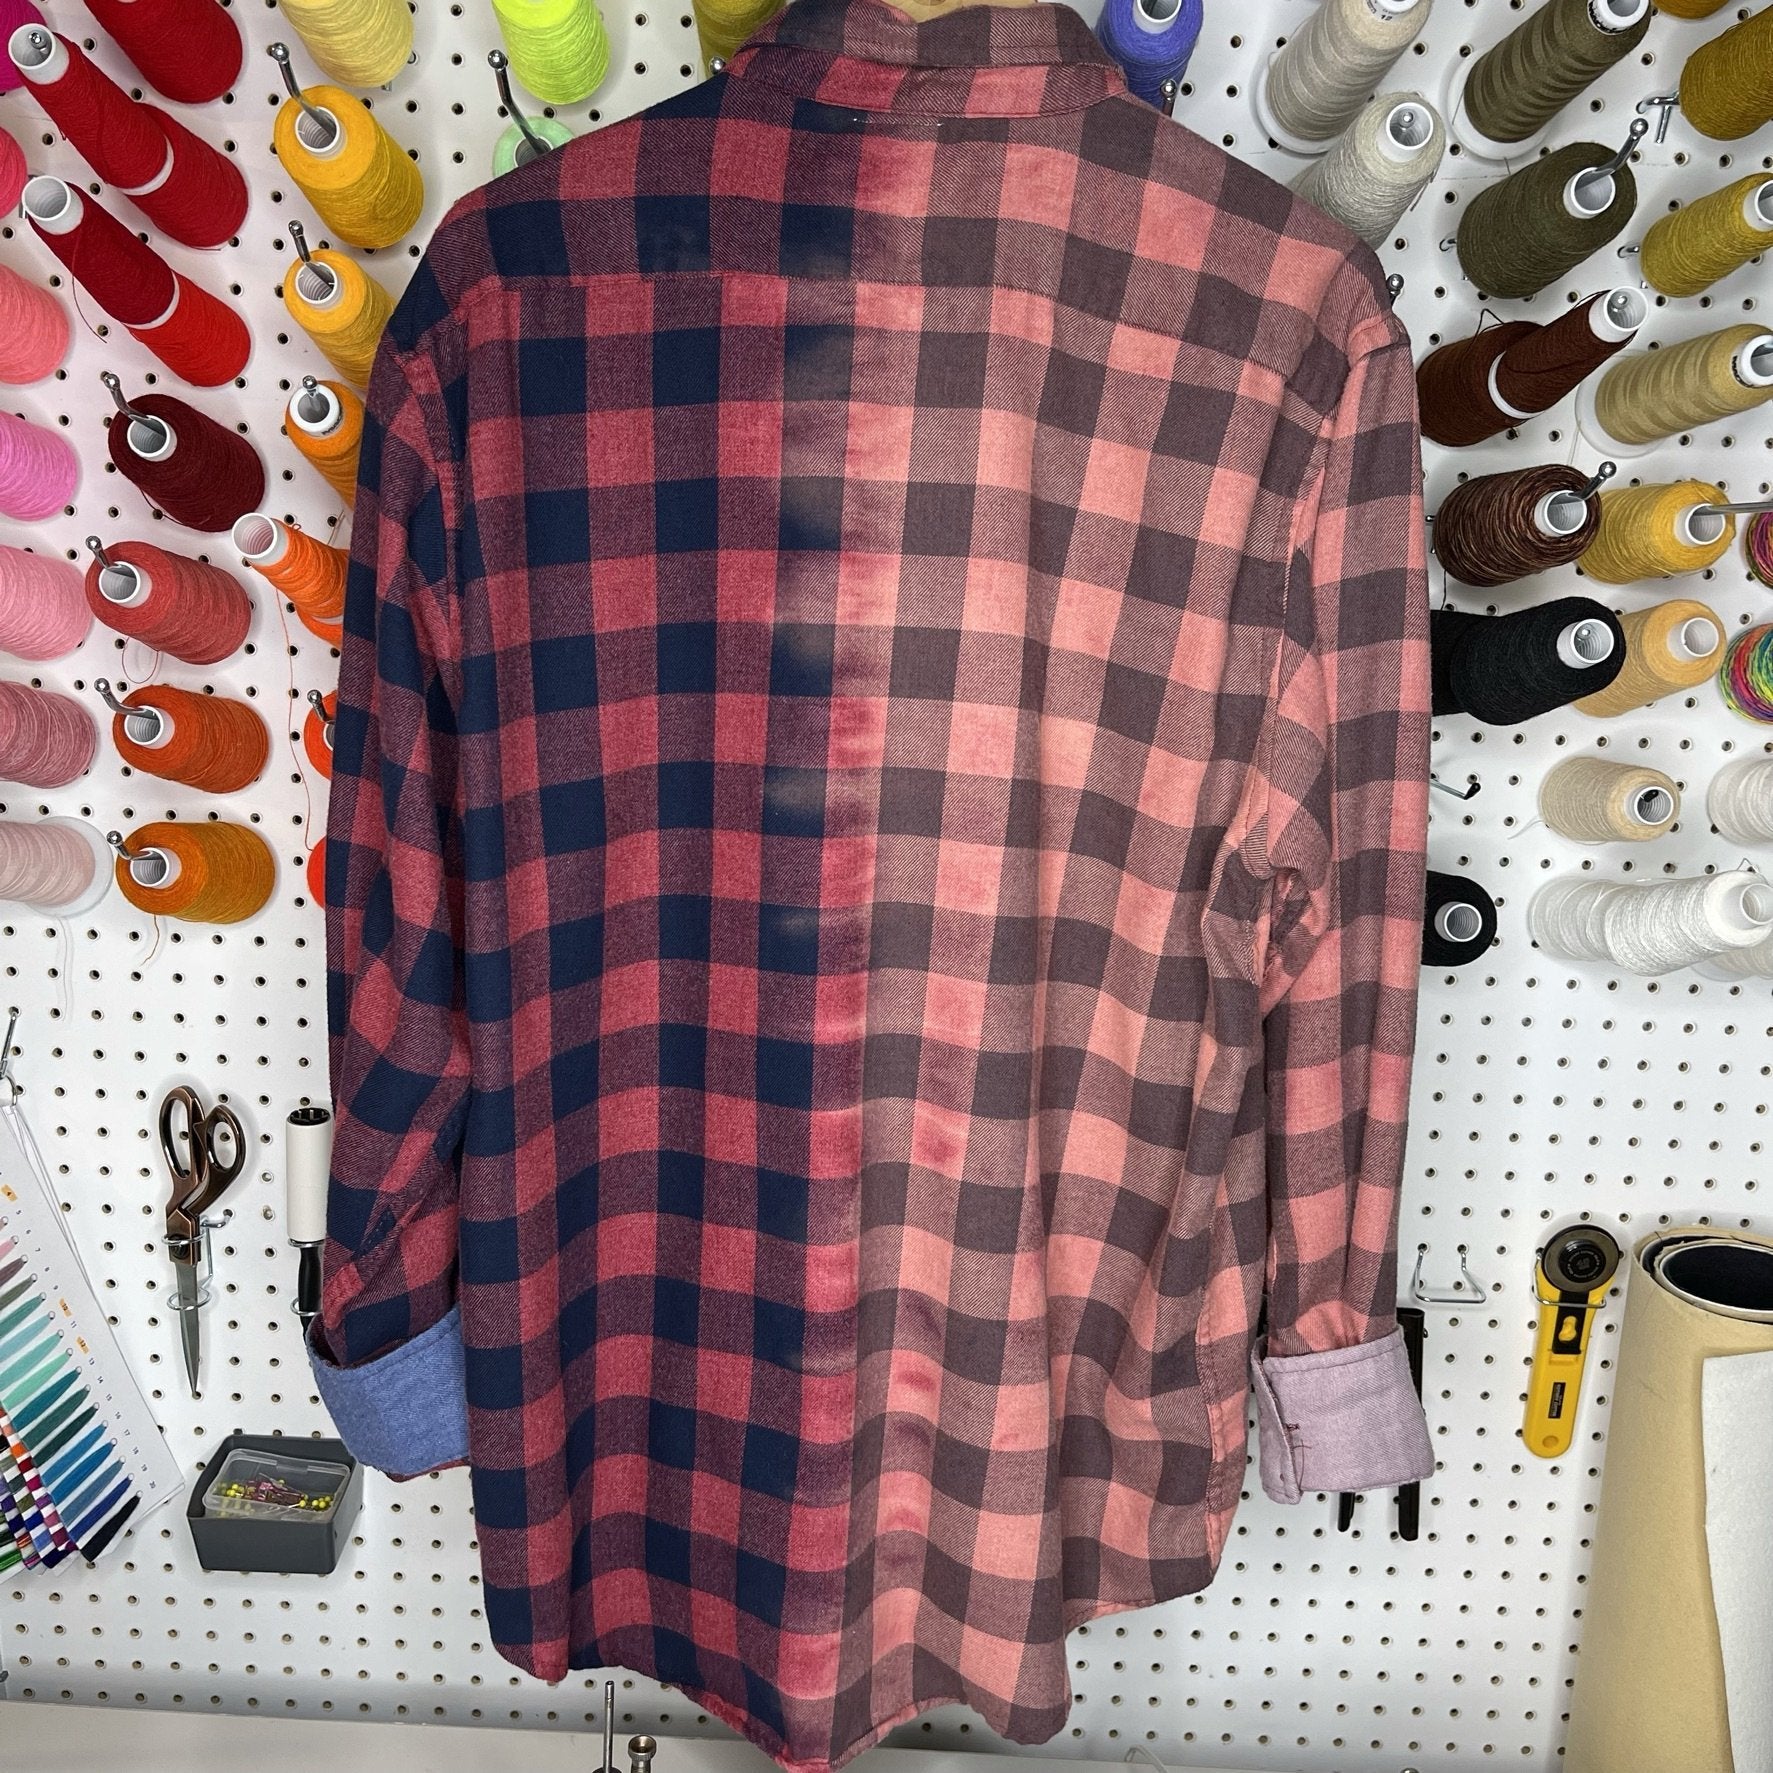 Denim Jacket - Large - Pink/Red/Navy Two-Toned Flannel - 4 DOTS